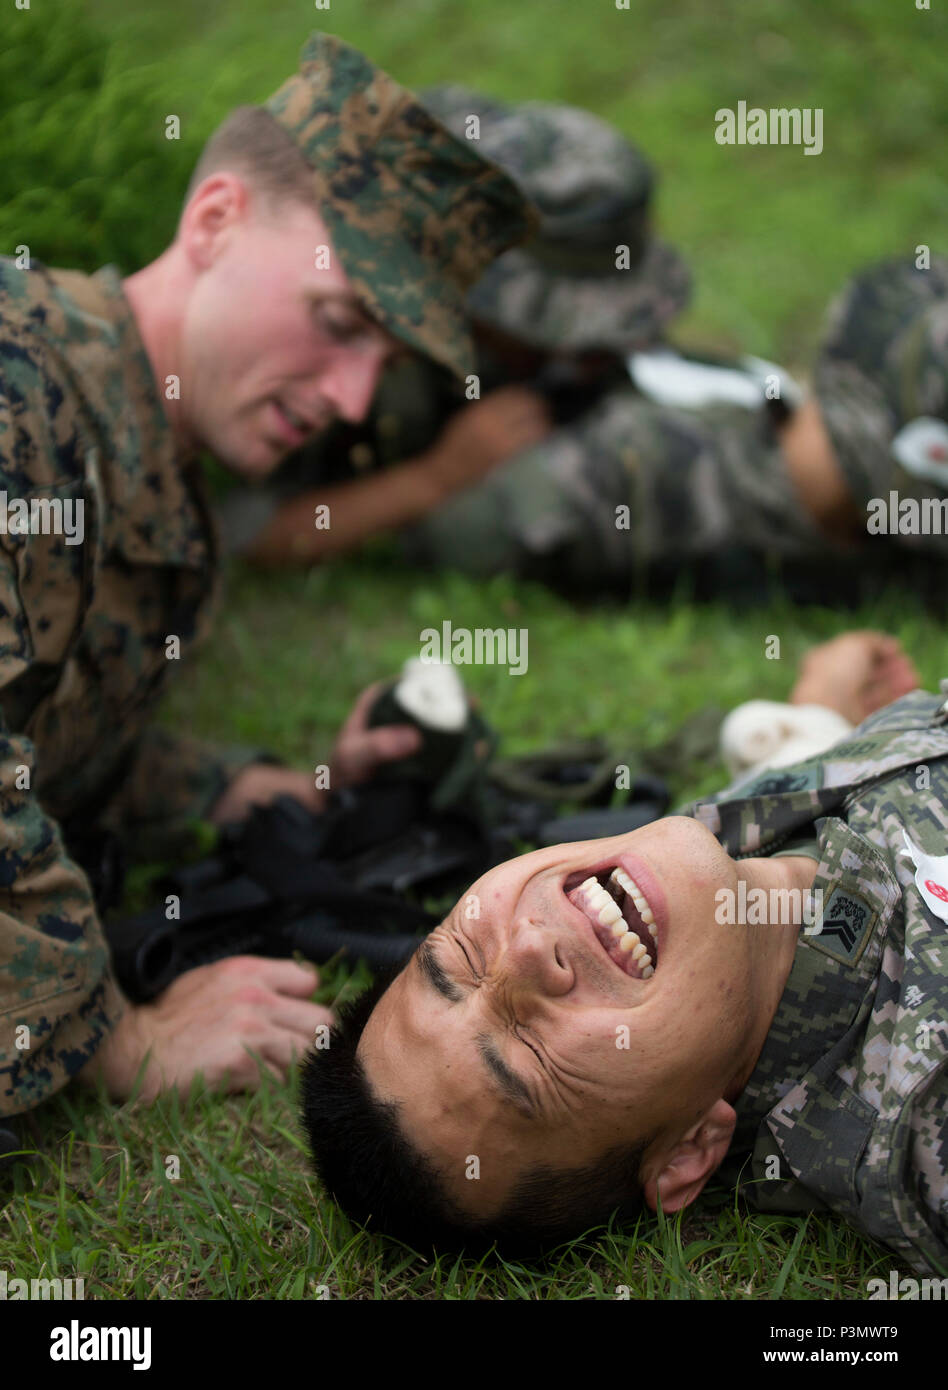 A Republic of Korea Marine yells in pretend pain as a U.S. Marine works to heal him during first aid during combat training July 11, 2016 during Korean Marine Exchange Program 16-11. KMEP offers realistic training leveraging the most advanced tactics and technology to ensure a trained and ready ROK-U.S. combined force. The ROK Marines were a part of 73rd Battalion, 7th Regiment, 1st Marine Division. The U.S. Marines participating in this training event are with 2nd Battalion, 2nd Marine Regiment, currently assigned to 4th Marine Regiment, 3rd Marine Division, III Marine Expeditionary Force thr Stock Photo